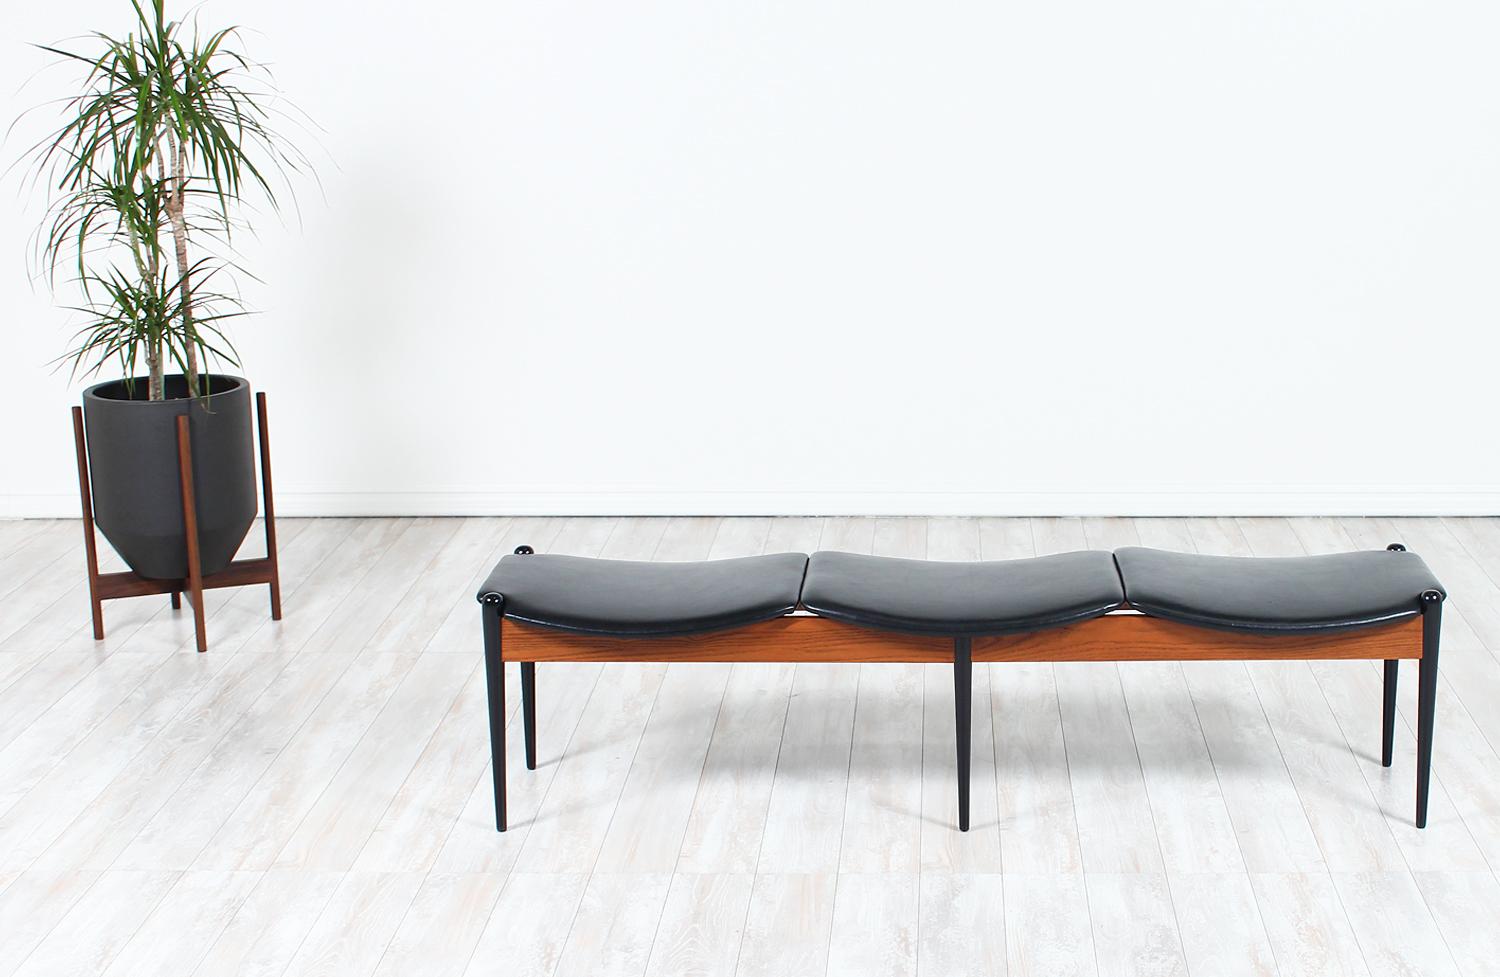 Sleek 3-seater bench designed and manufactured in Denmark circa 1950s. Featuring three newly upholstered seats in full grain black leather that rests over a teak wood frame. The tapered black-lacquered wood legs complement the black upholstery